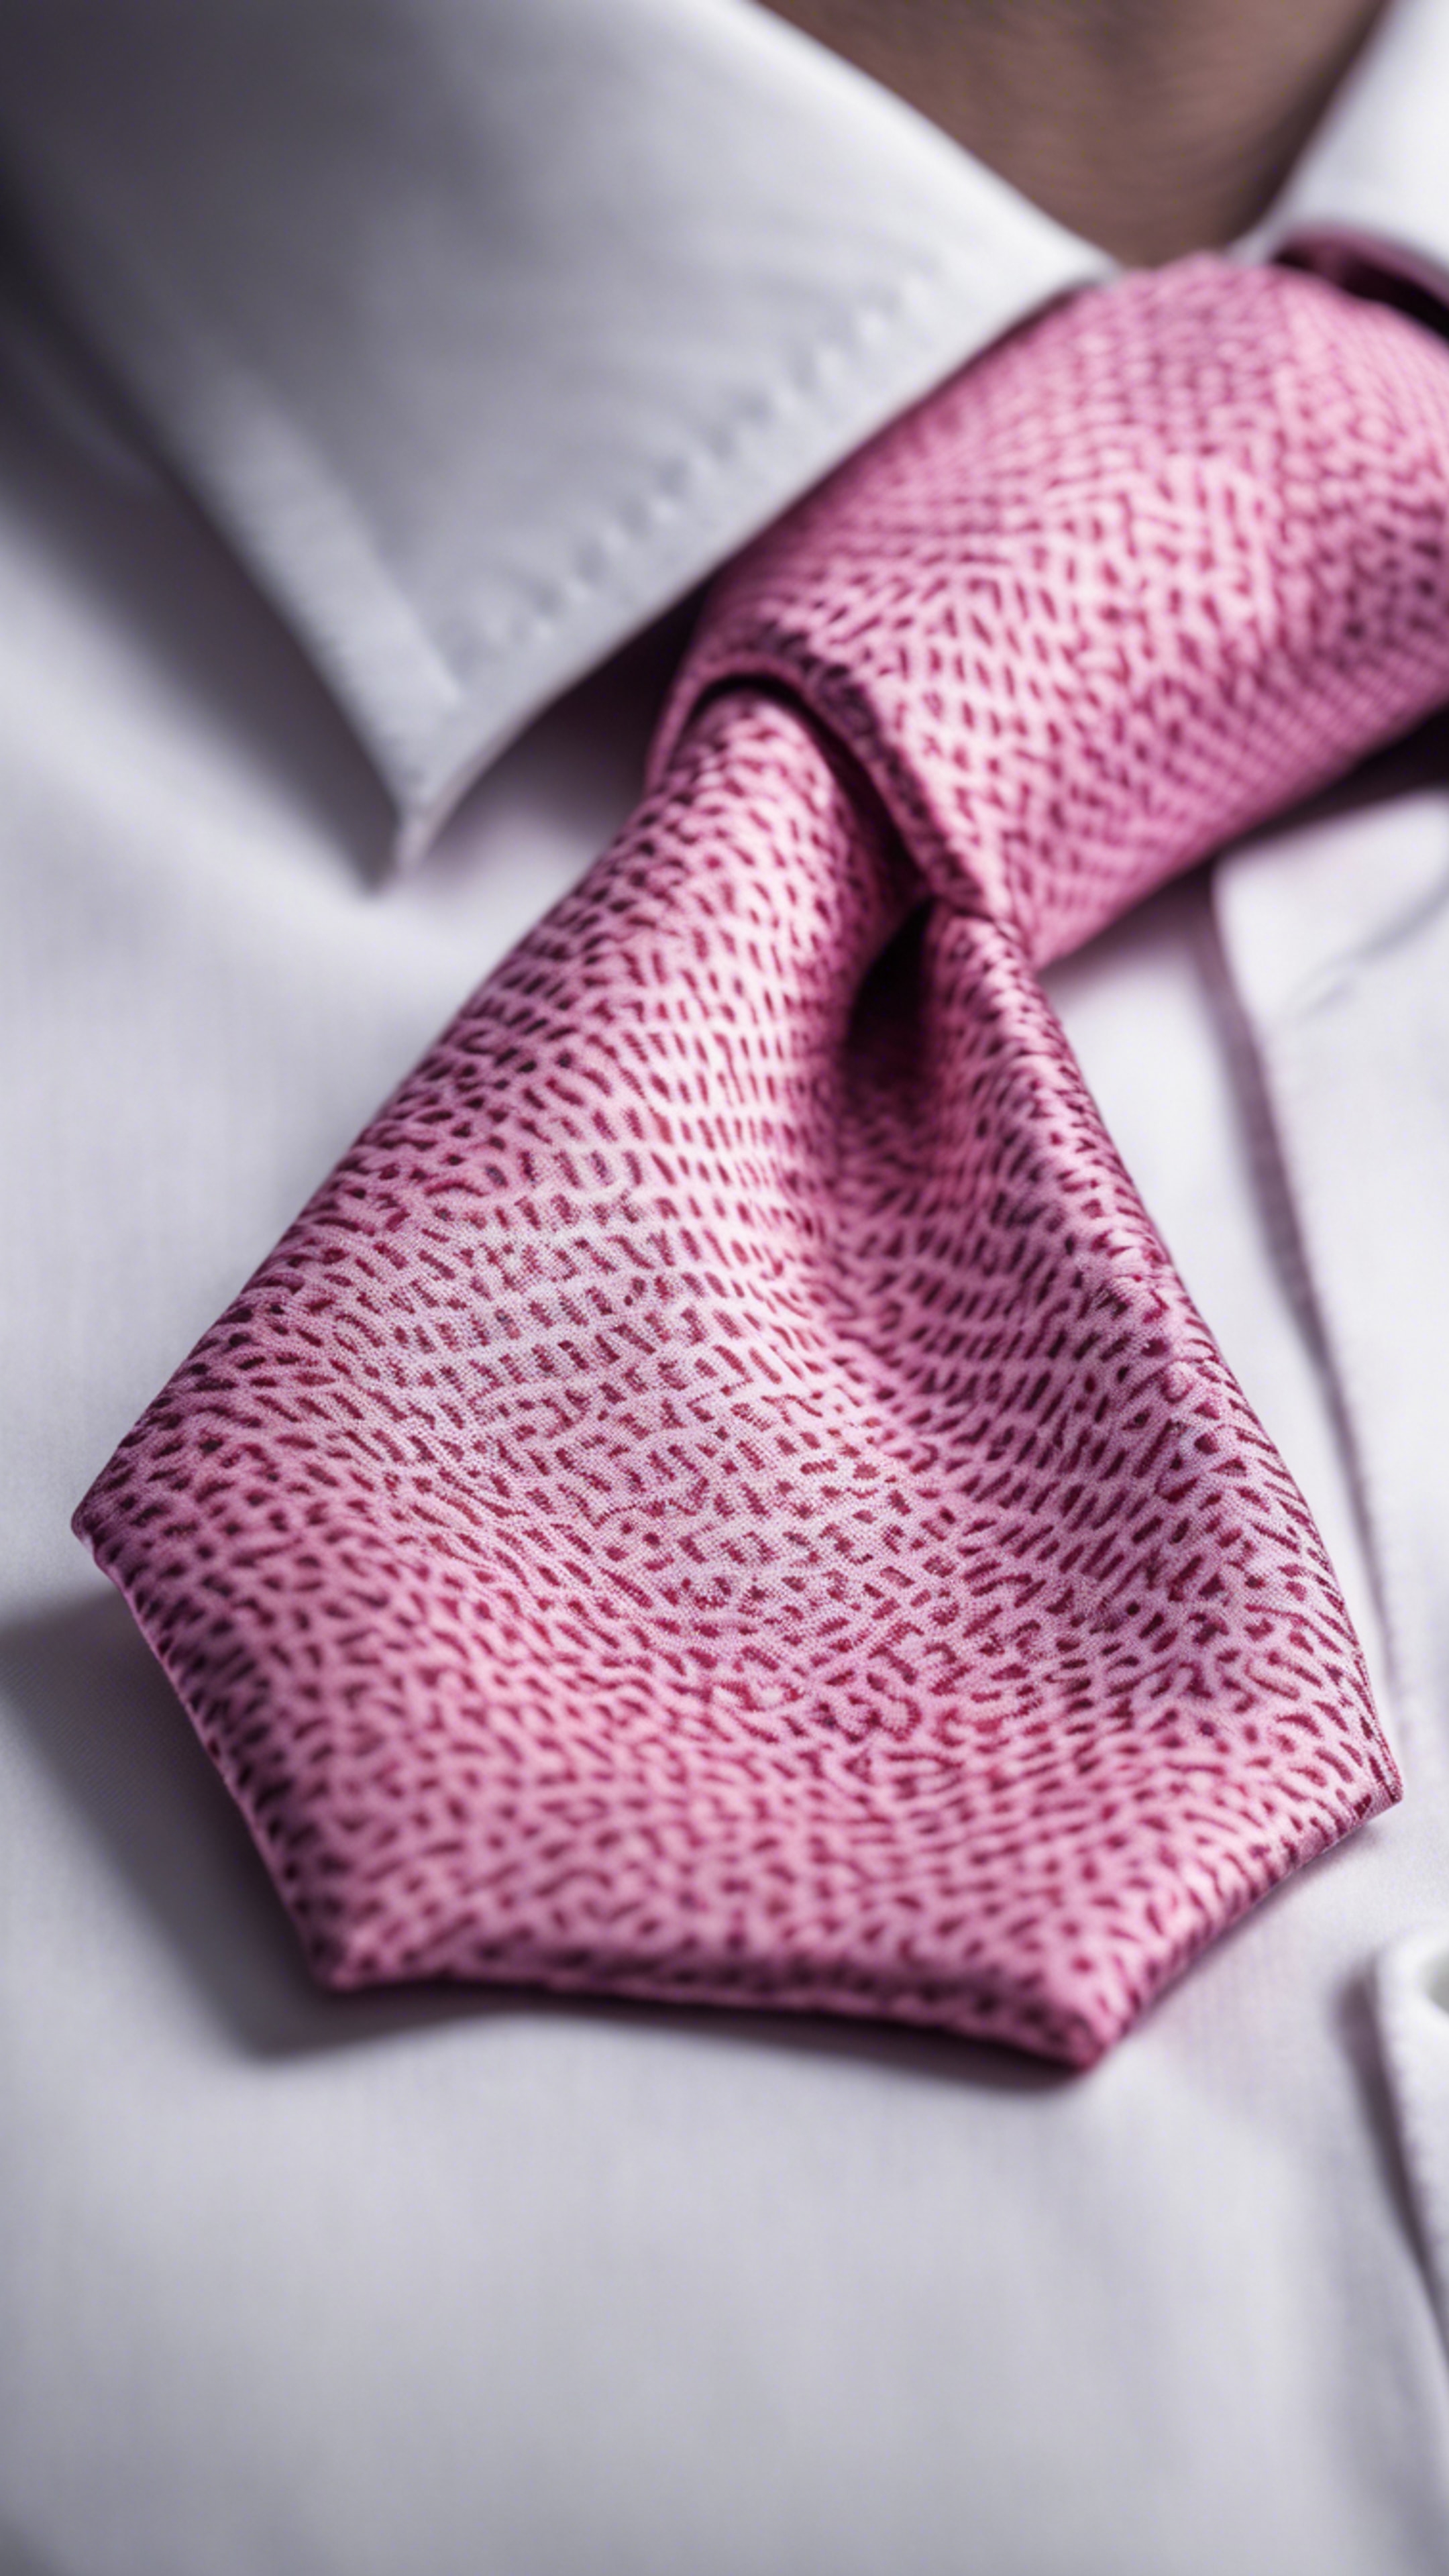 A pink patterned silk tie atop a clean, starched white shirt, representing preppy fashion. Tapéta[46ce982d17ca4b87a426]